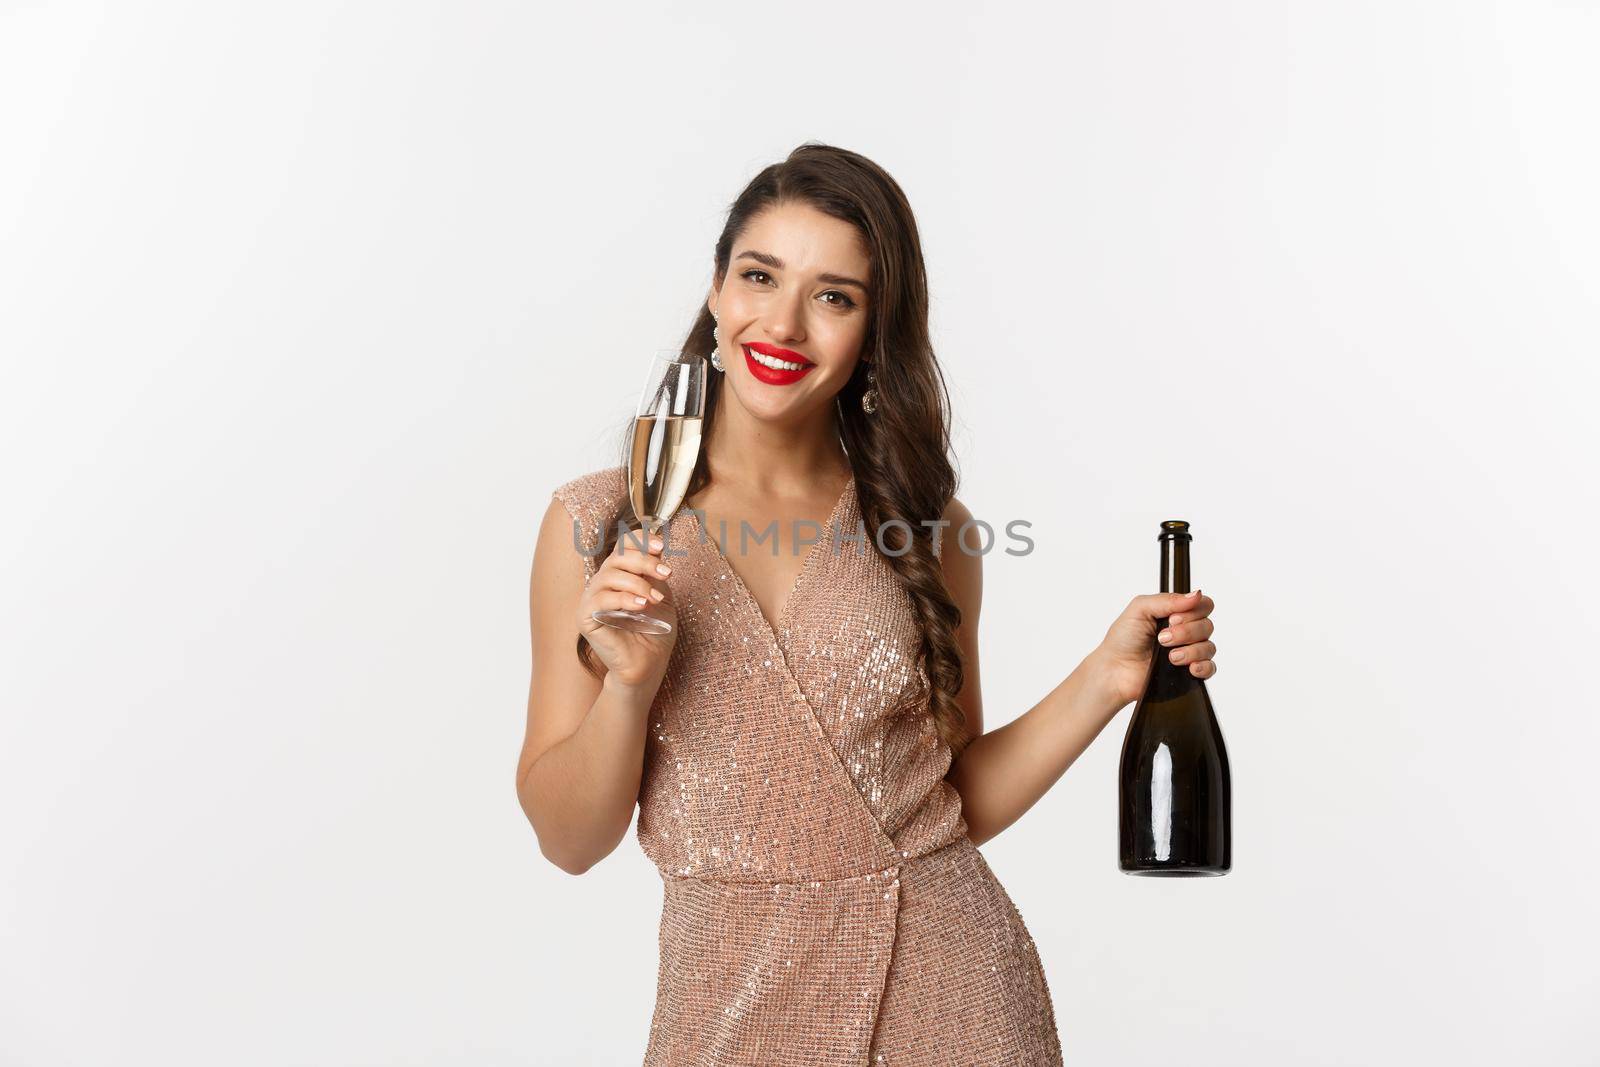 Winter holidays celebration concept. Image of happy young woman in luxury dress, drinking champagne from glass, holding bottle, New Year party, white background.